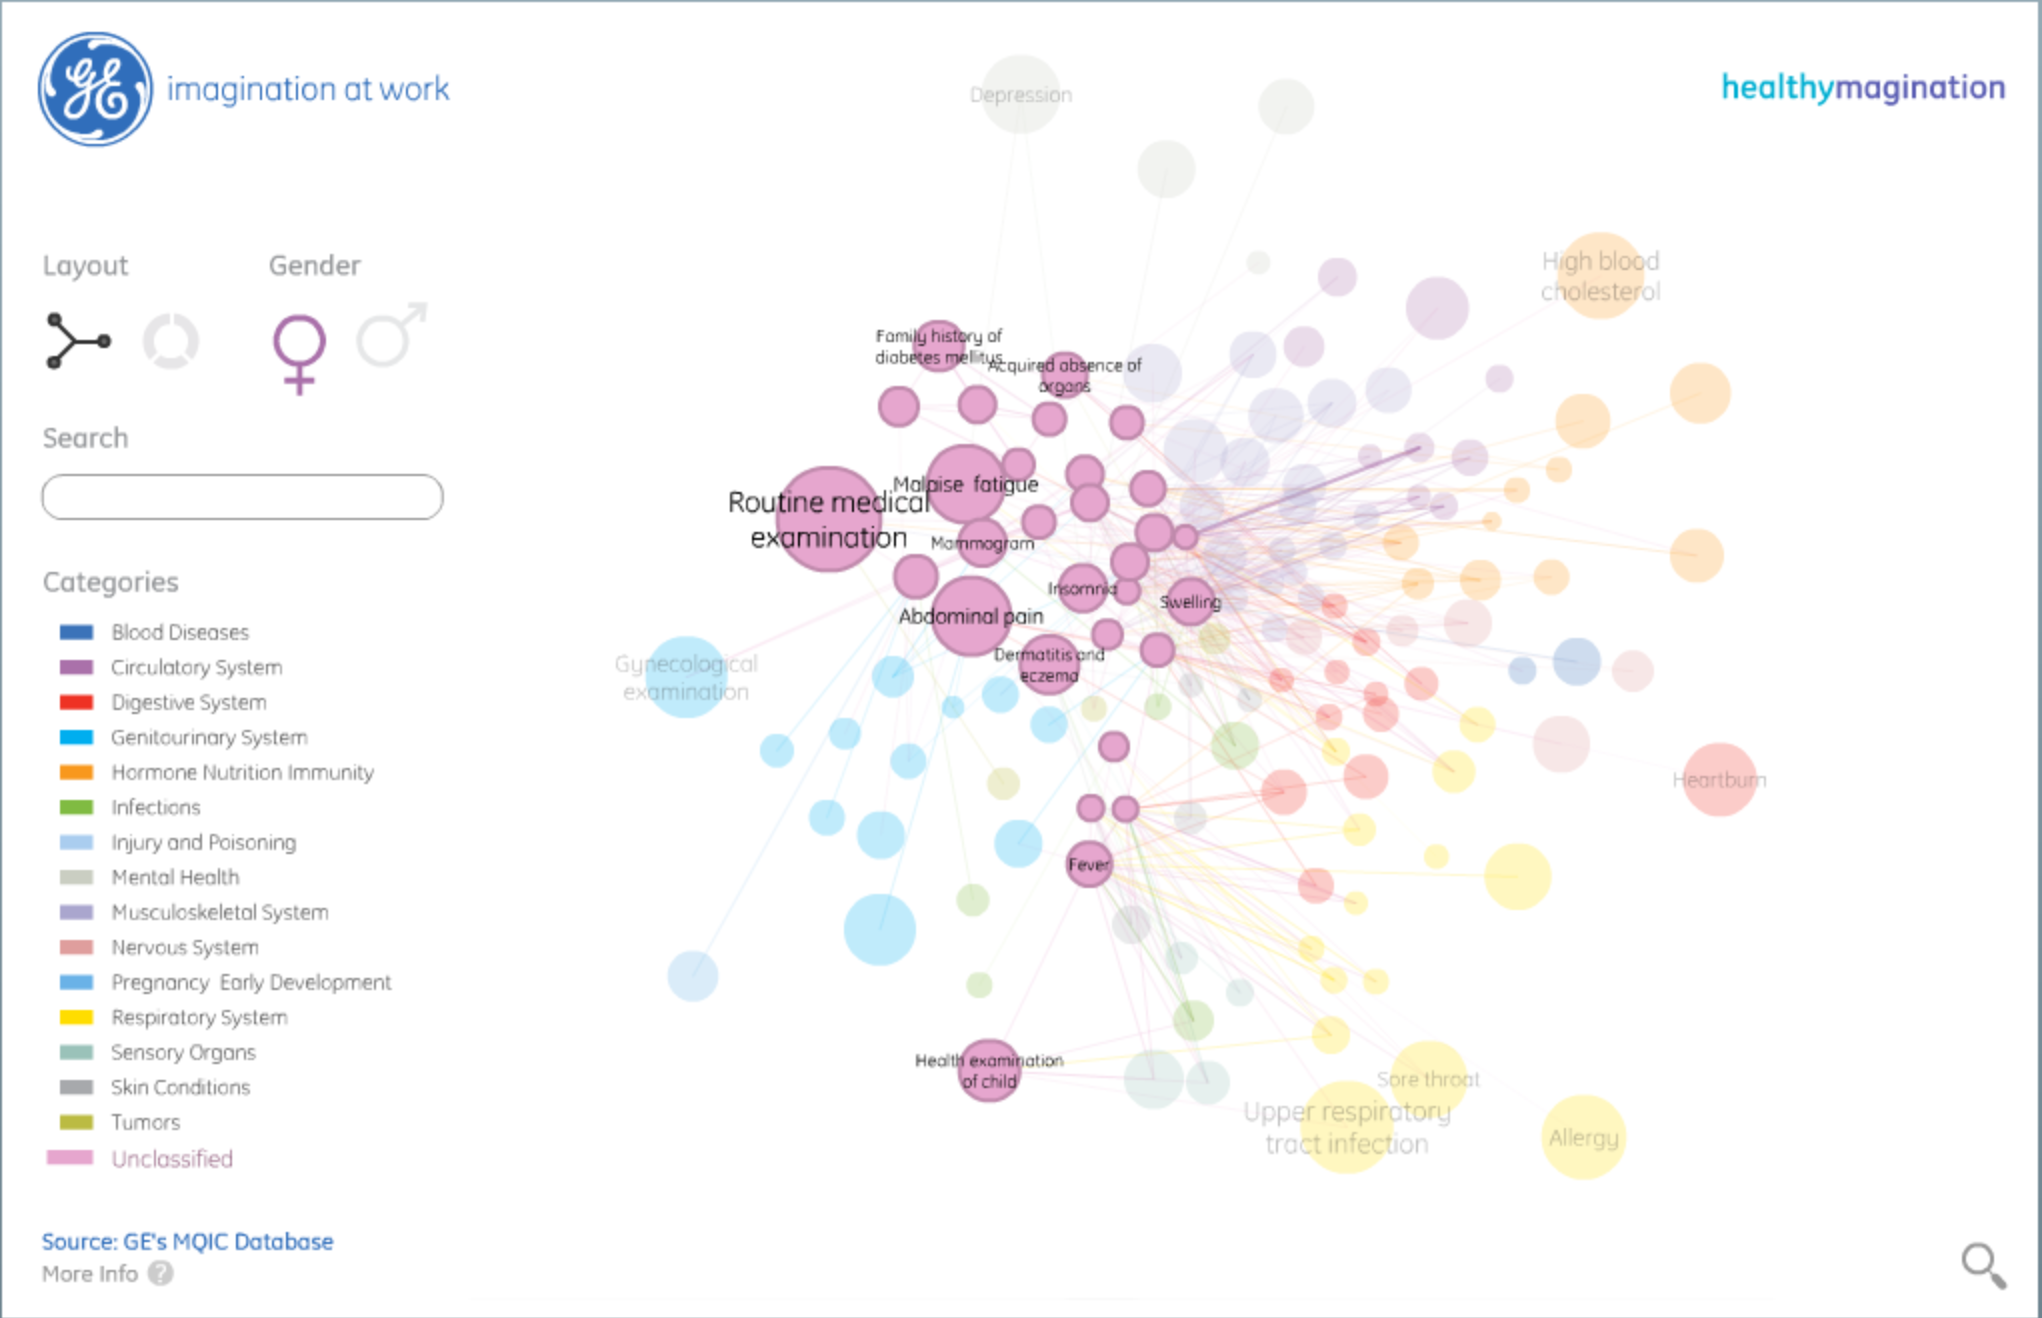 A view of the Health InfoScape website from MIT and GE [image courtesy GE Data Visualization].